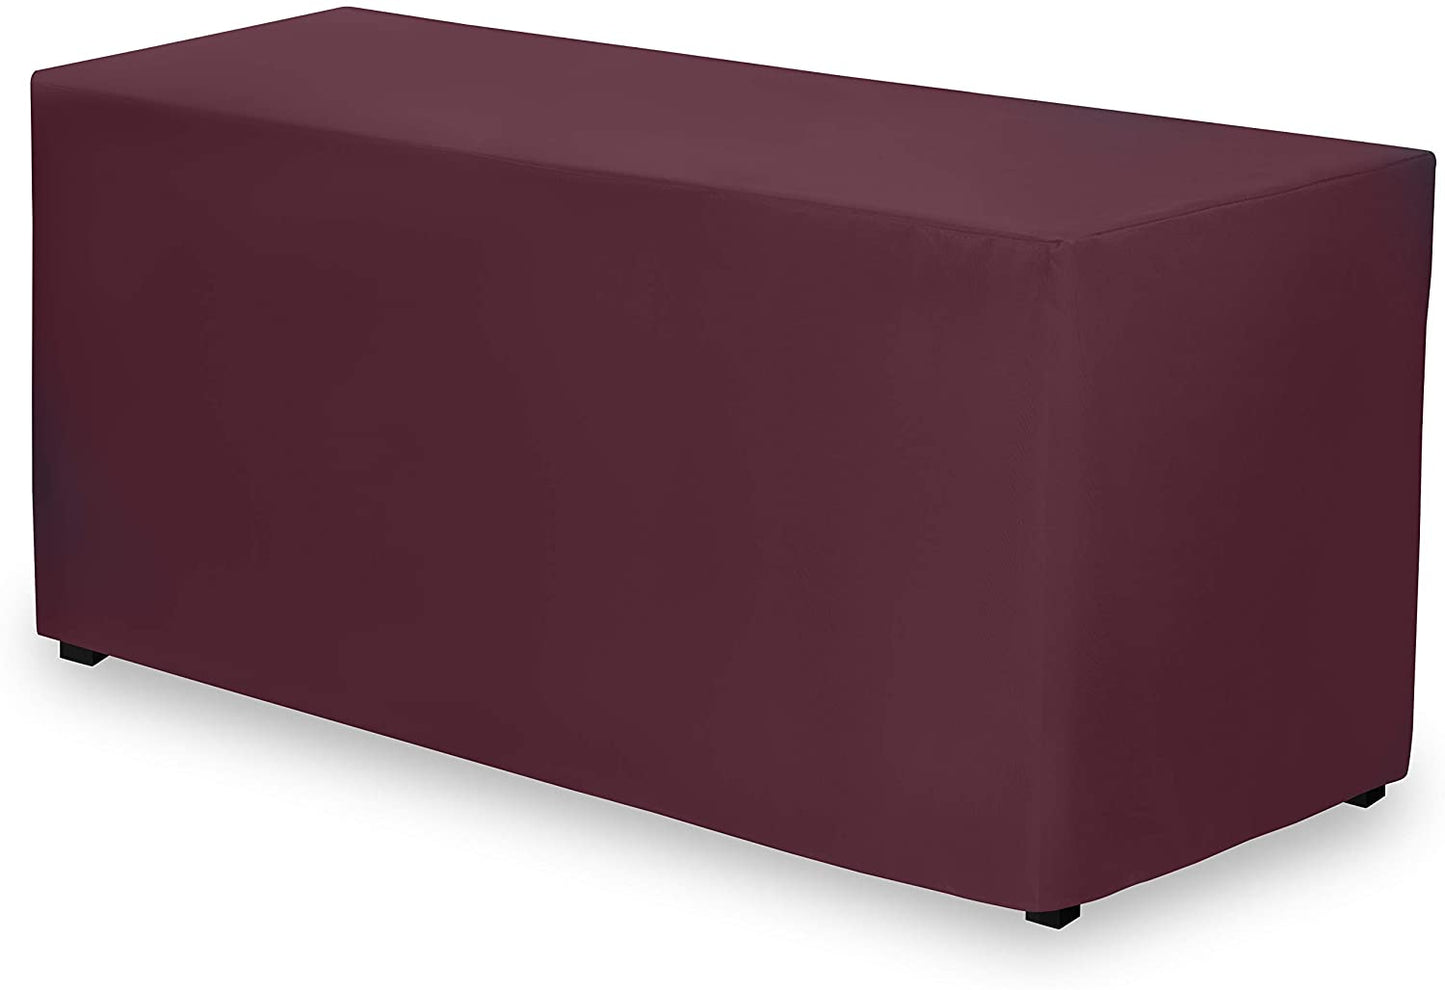 Burgundy fitted tablecloth, view from corner.